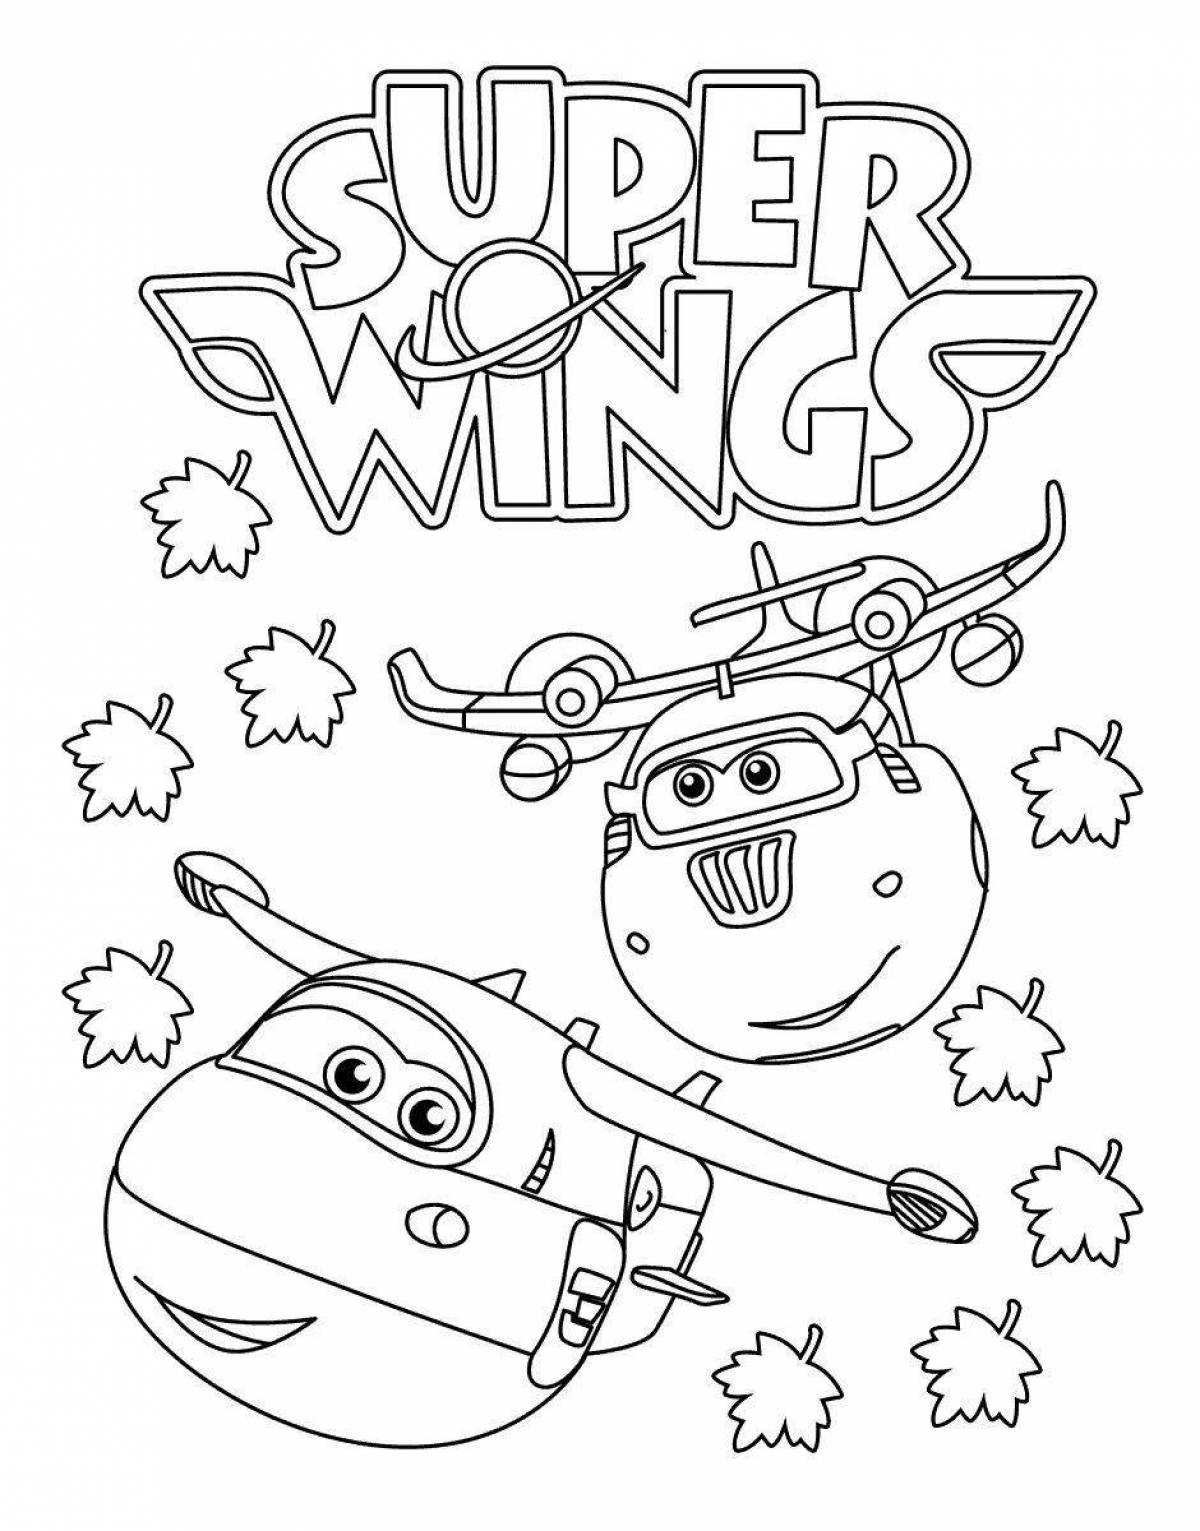 A wonderful dizzy super wings coloring page